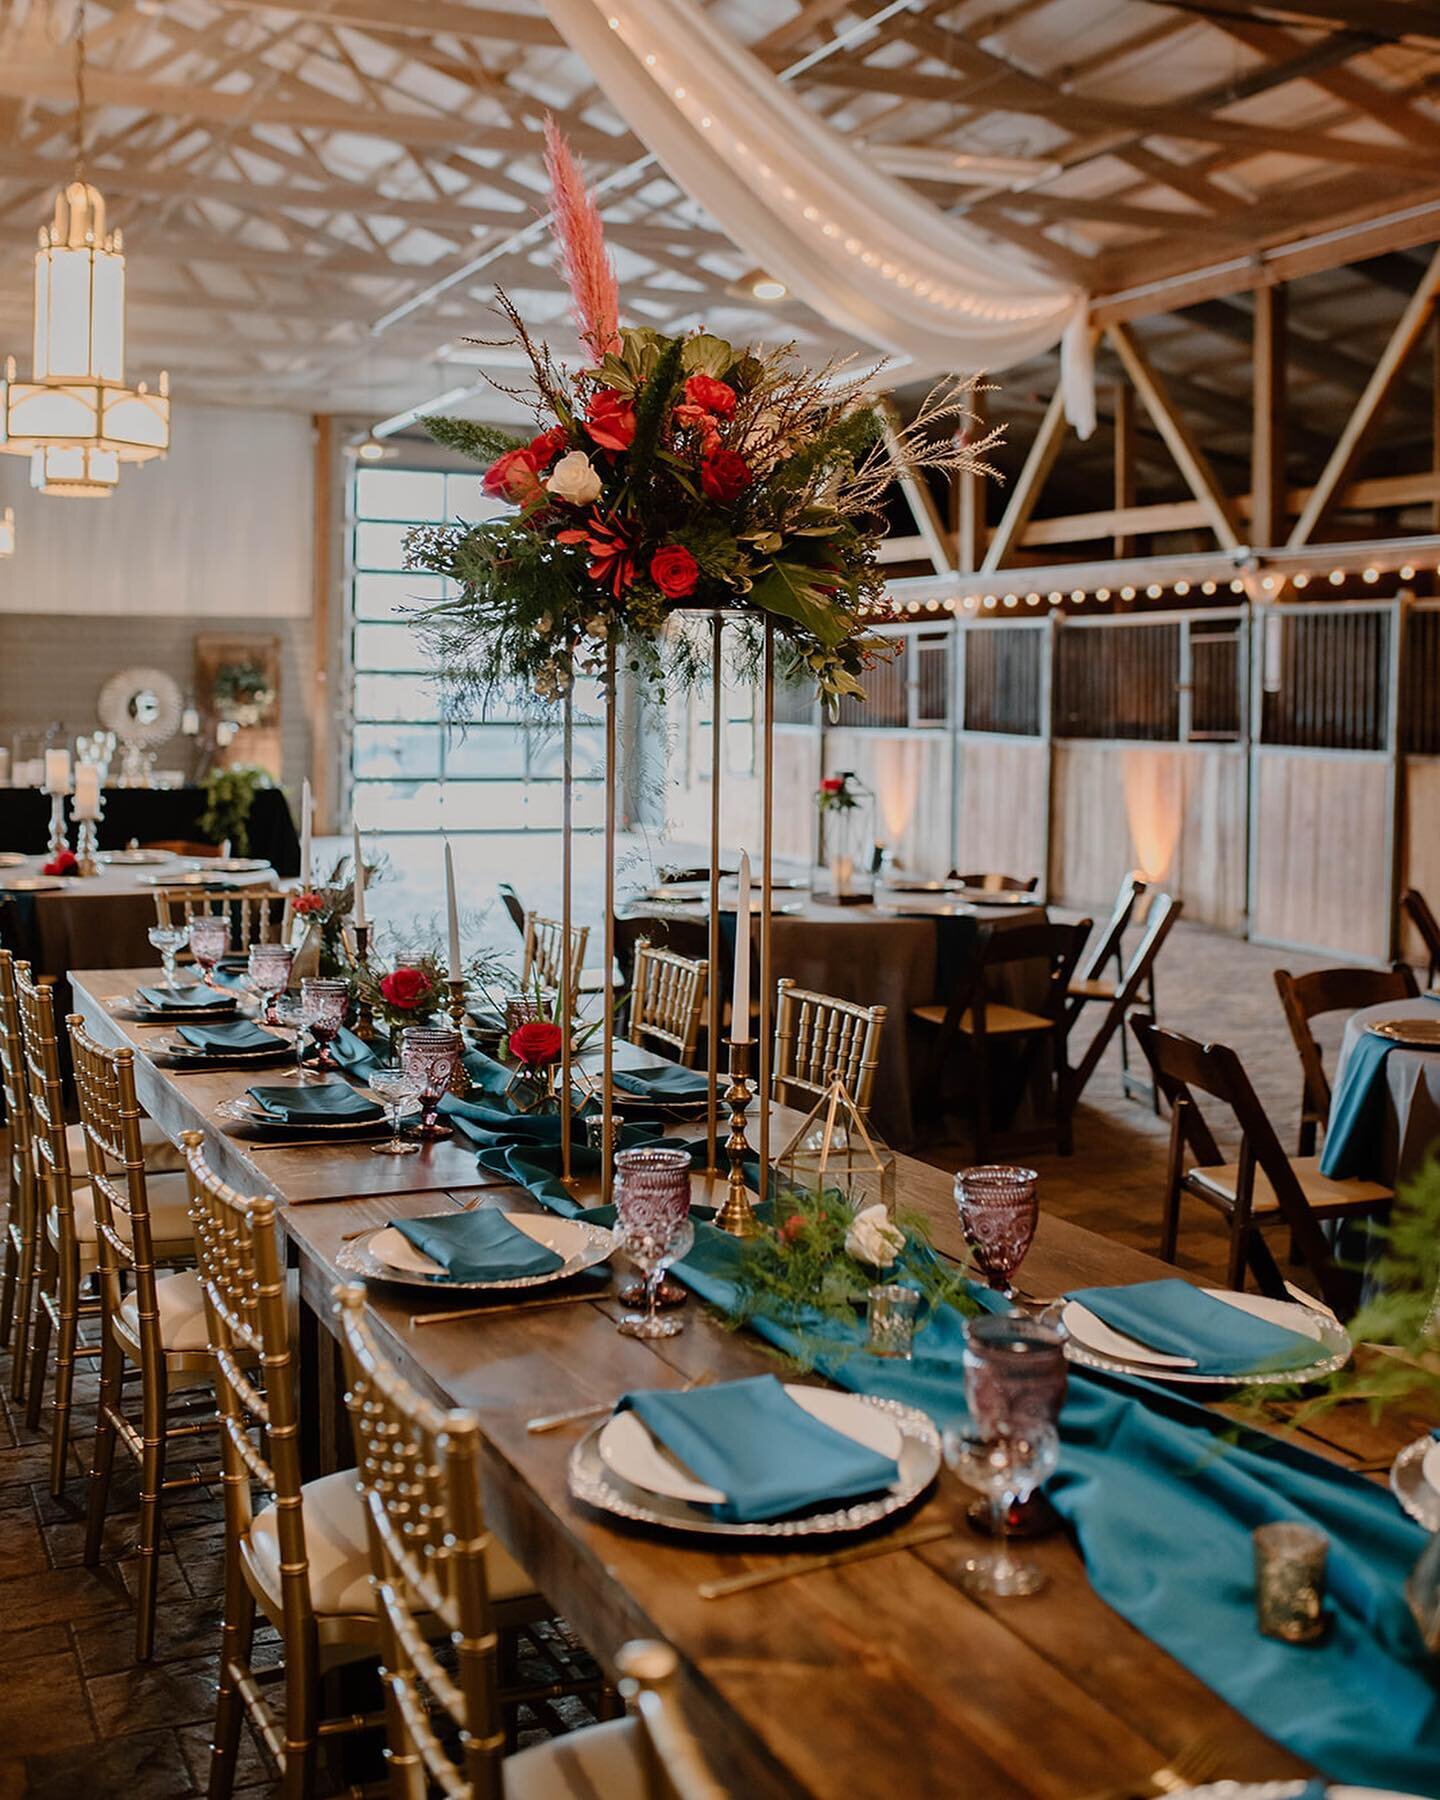 Kentucky Bride Magazine featured our styled shoot from January 2021 on their blog! Our inspiration was bold jewel tones and we let the vendors run with the idea. Click the link in bio for more pictures from the shoot 🤍 &bull;&bull;
Amazing vendors:
